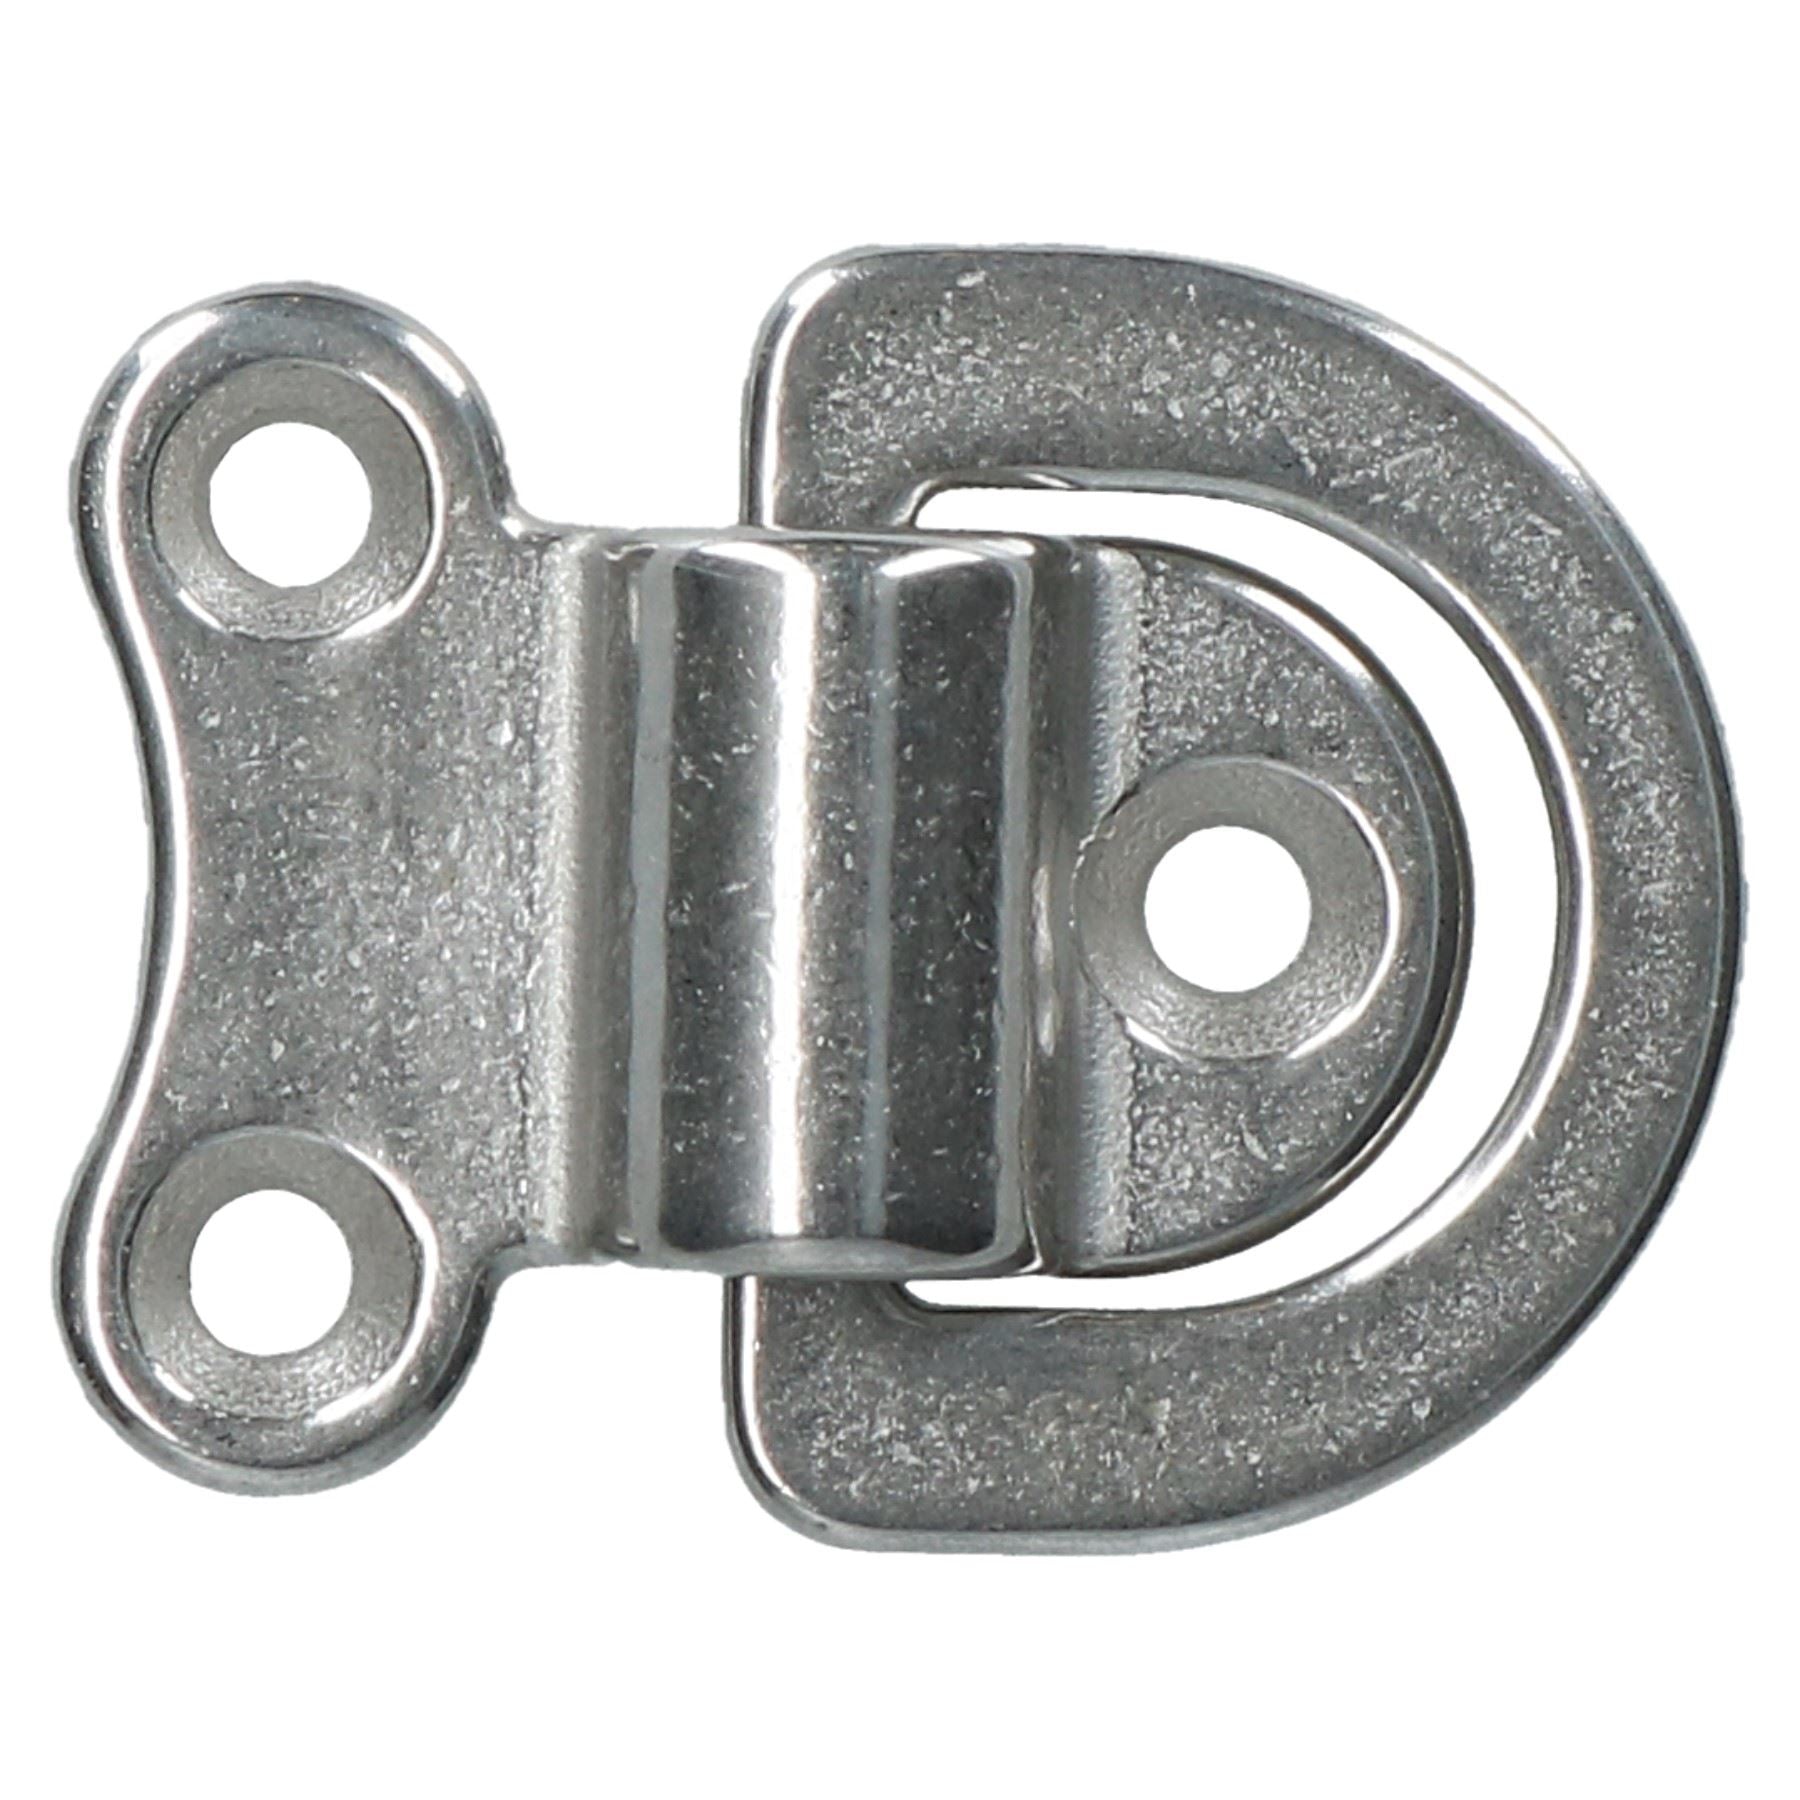 24mm Folding Pad Eye Ring Tie Down Anchor Marine Grade 316 Stainless Steel